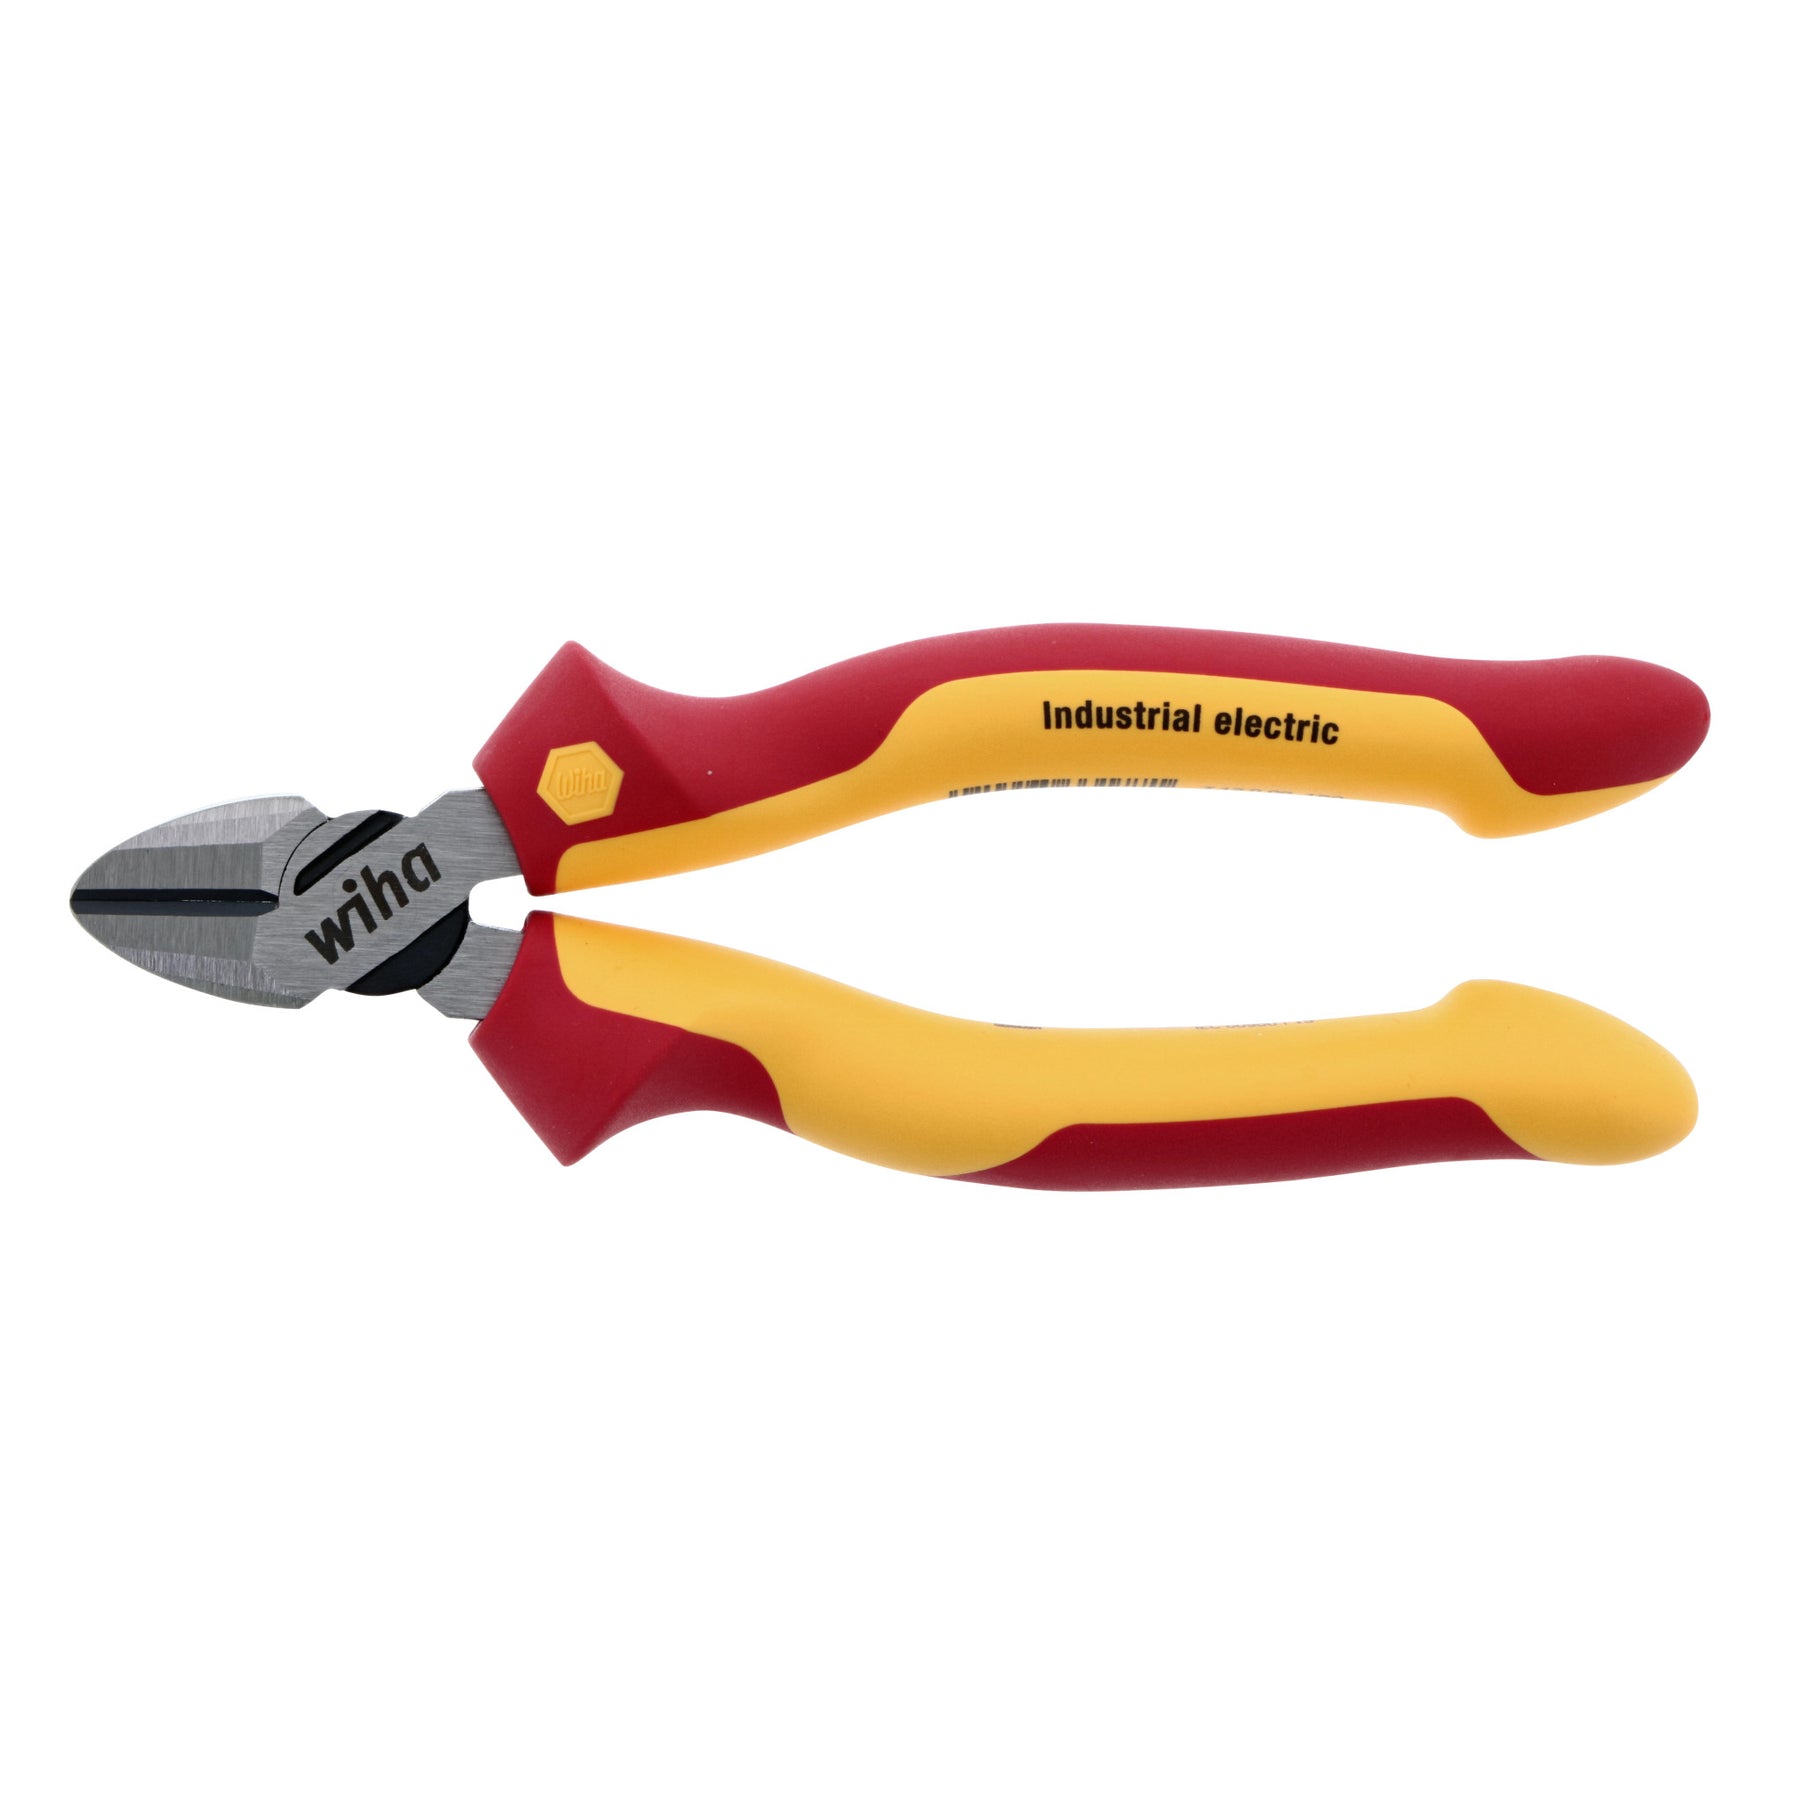 Insulated Pliers Set, Best Electrical Pliers Set of 3